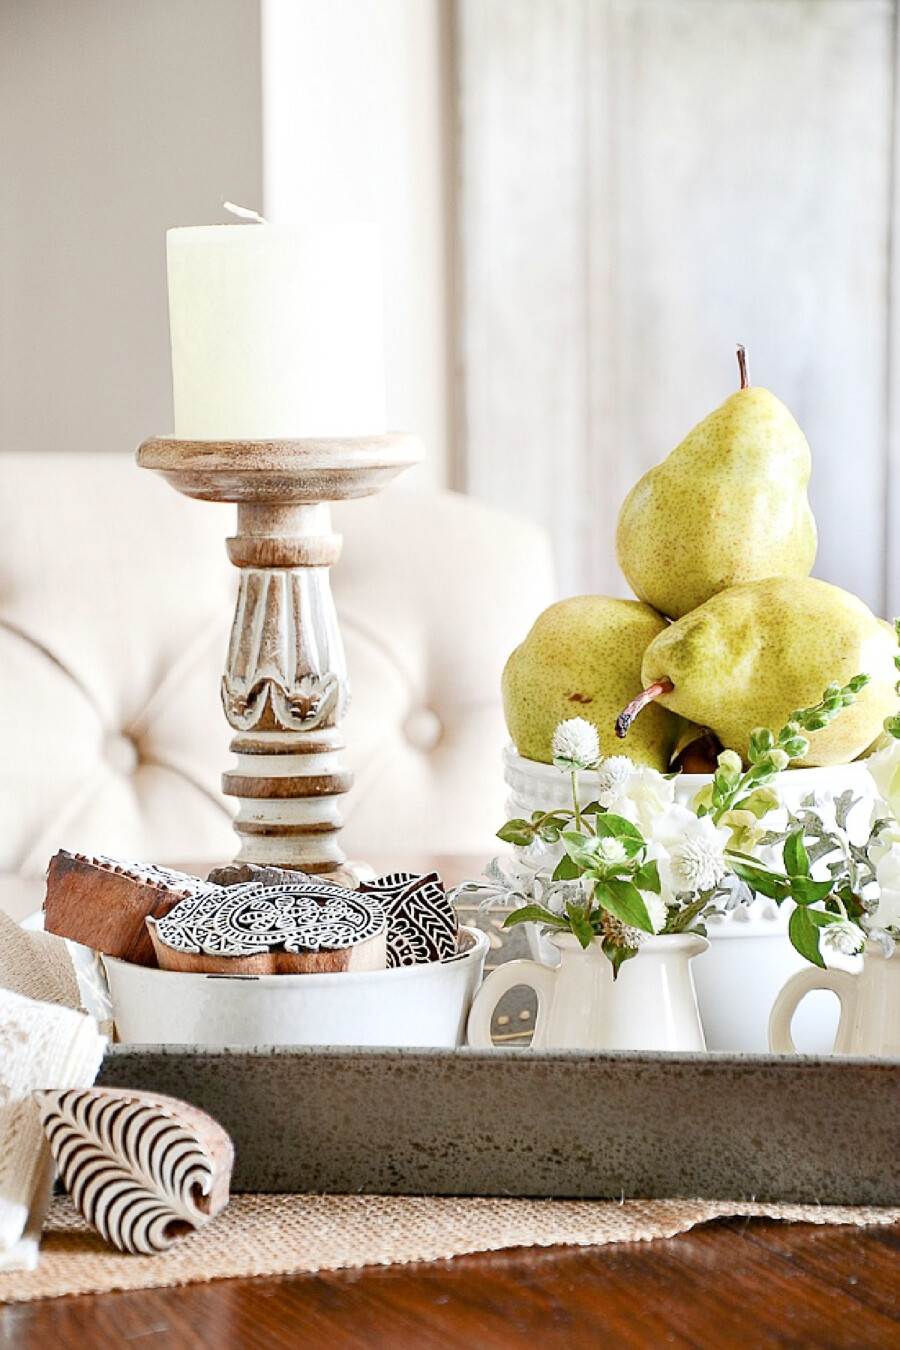 60 FABULOUS FALL DECORATING IDEAS AND MORE